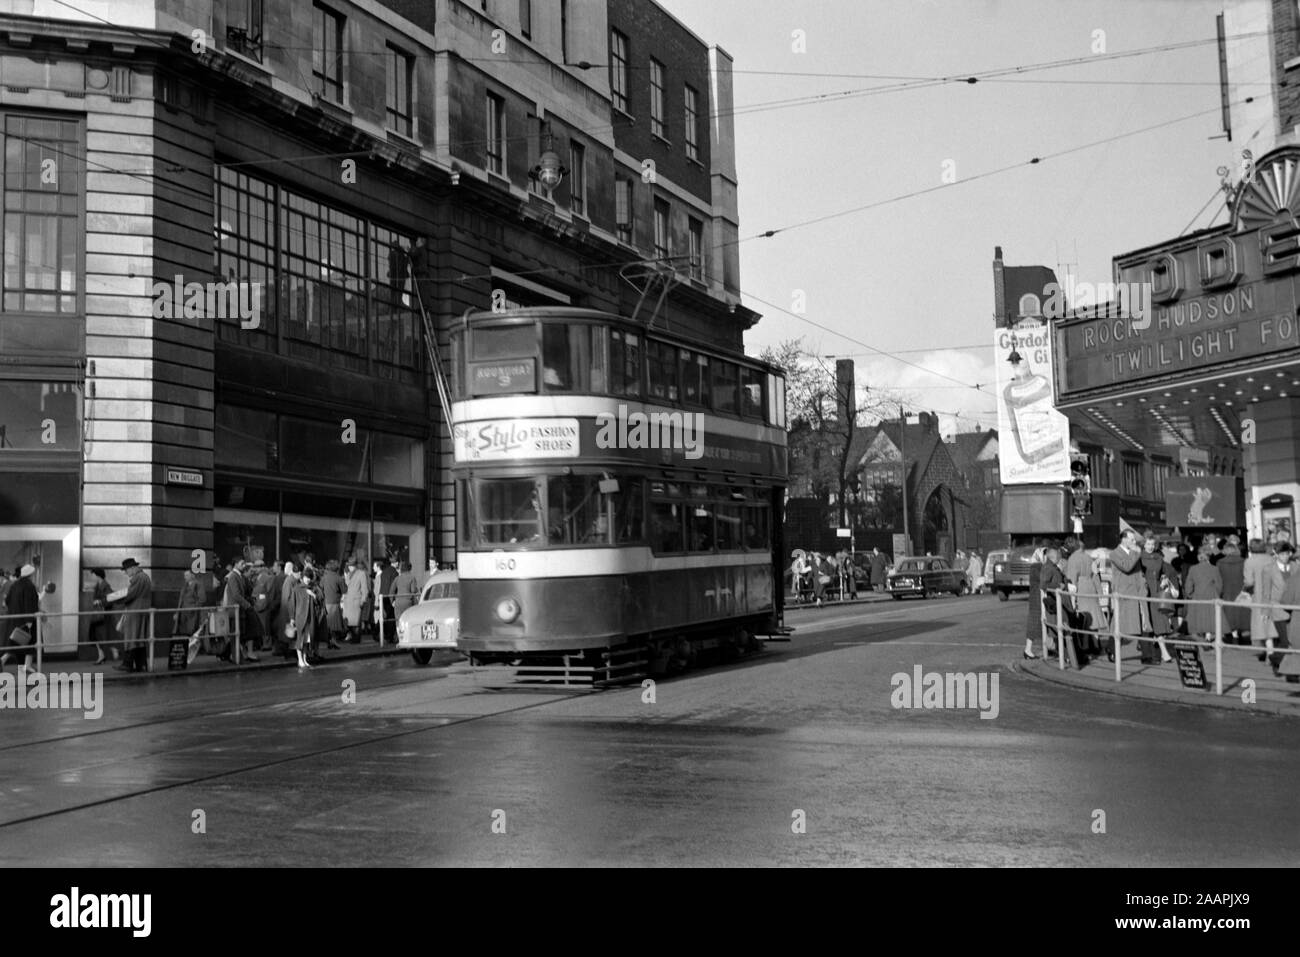 Leeds Standard Tram no 160 outside the Odeon Cinema at New Briggate in 1958 The cinema is showing Twilight for the Gods - staring Rock Hudson. Leeds city has changed somewhat over the years. The Cinema building is still there but is now a Primark store. Stock Photo